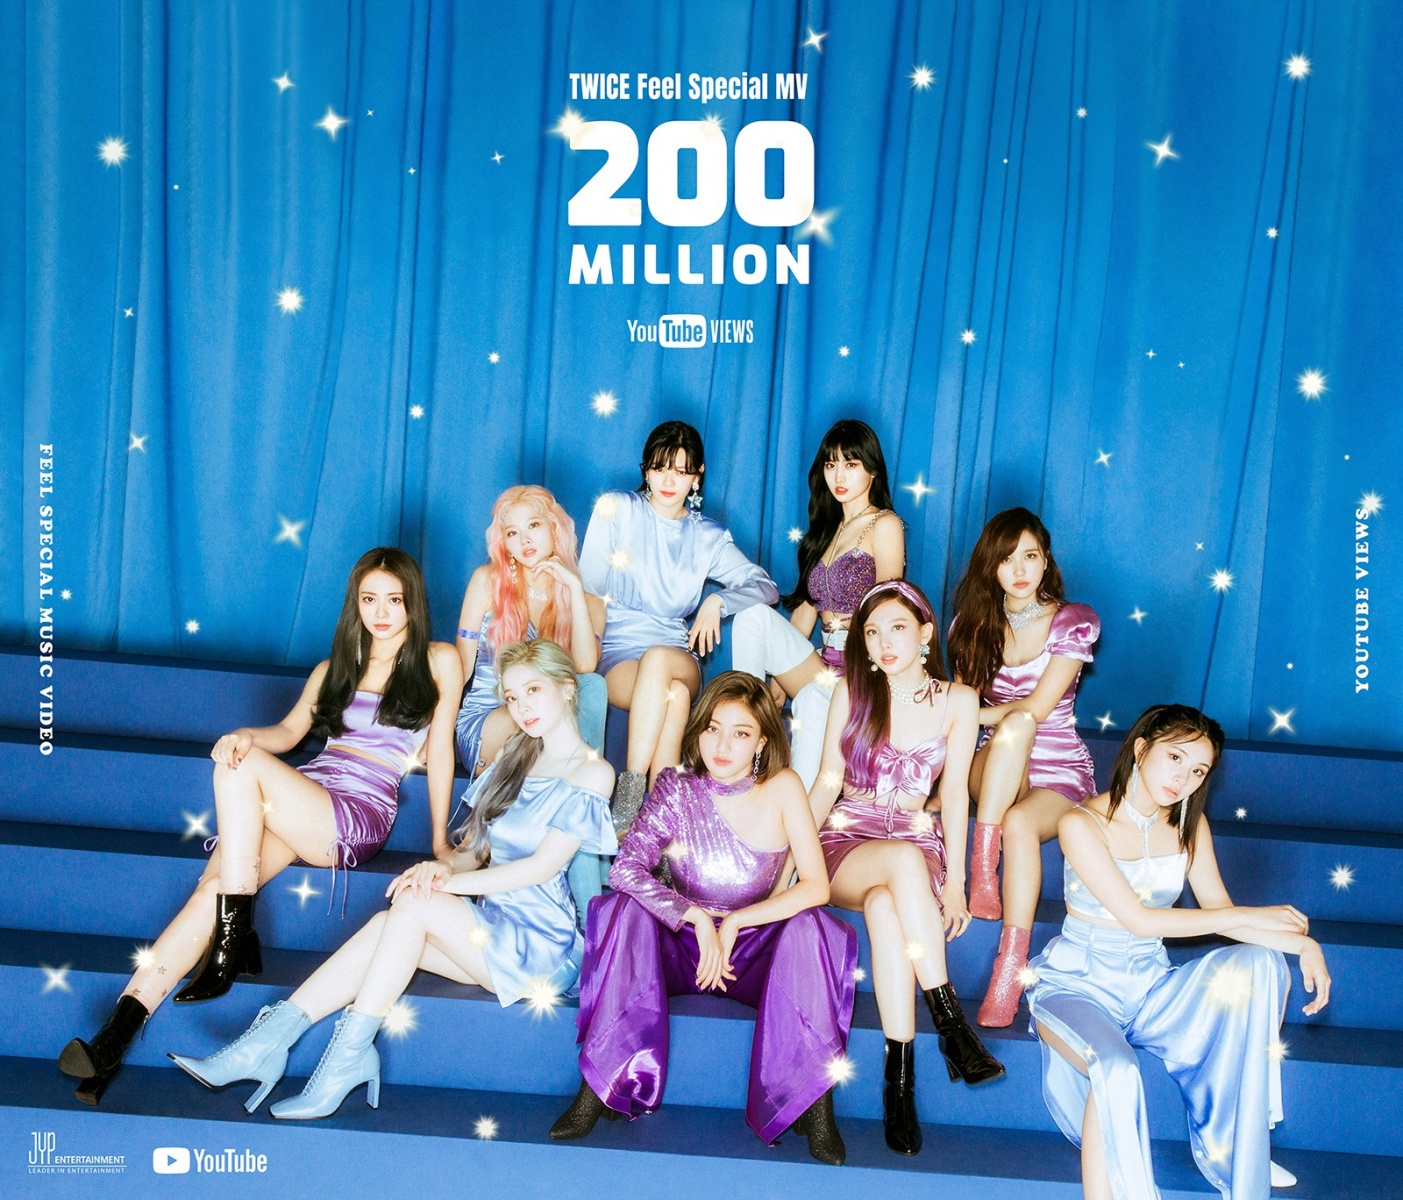 TWICE “Feel Special” MV from Their 8th Mini-album has Already Exceed 200 Million Views on Youtube